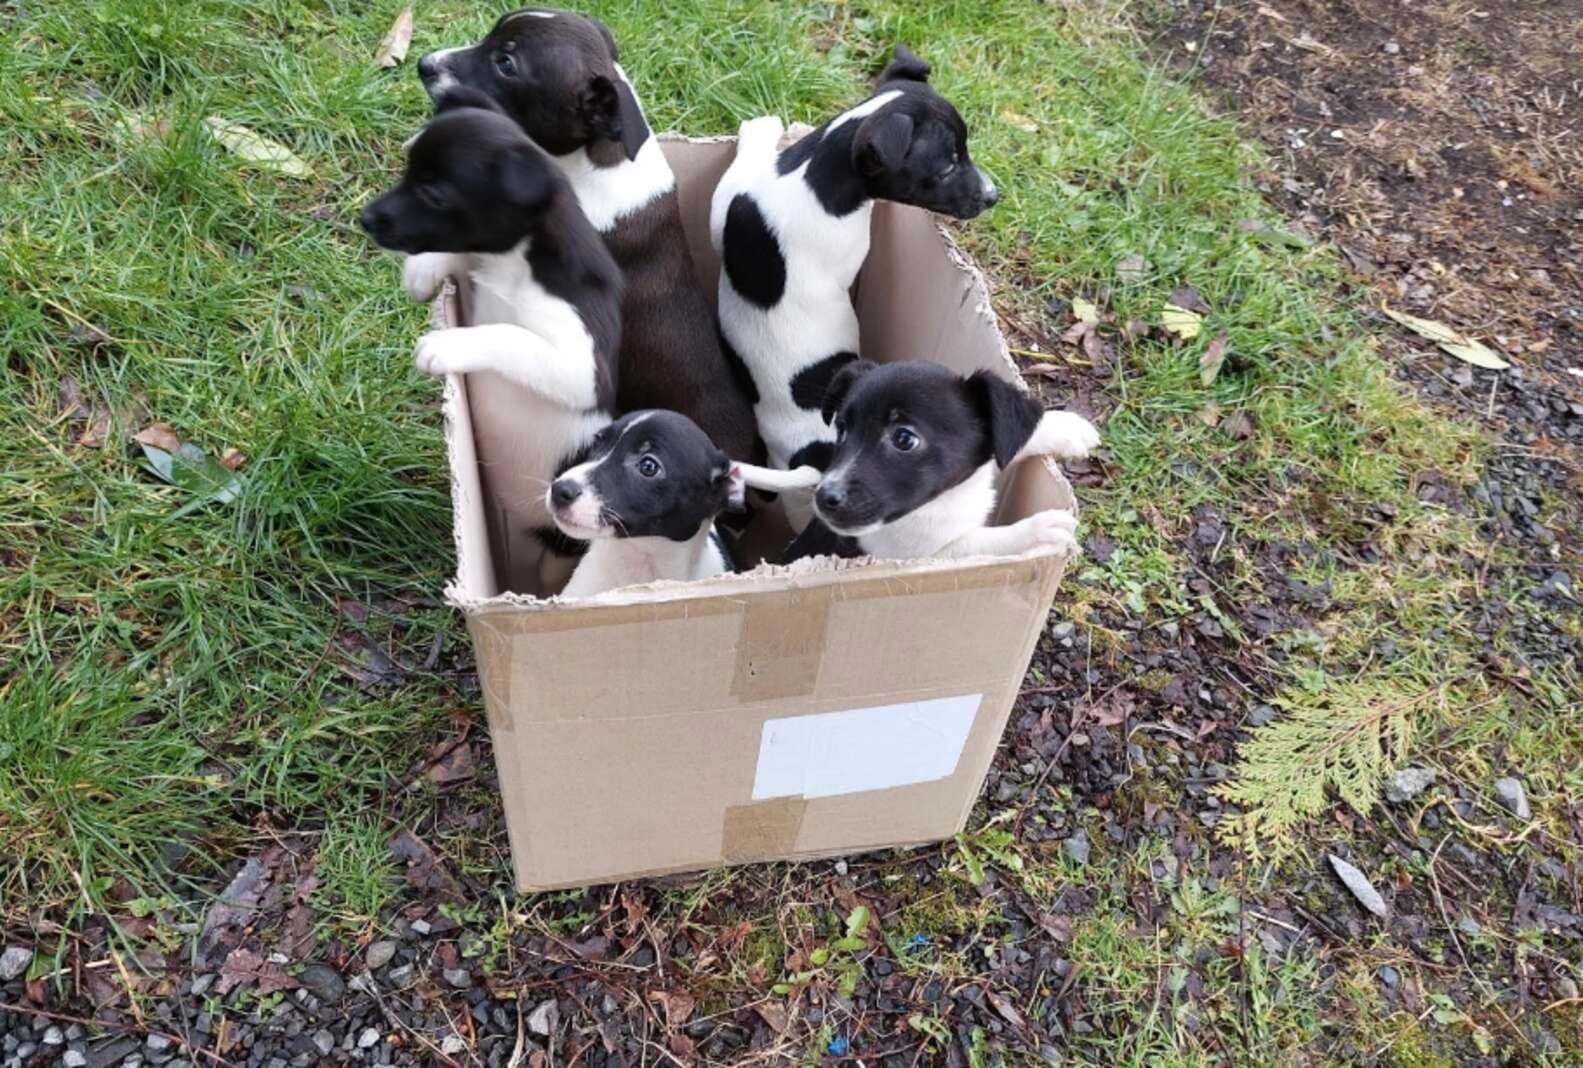 Puppies Sat in a Box by a Busy Road, Wishing for Someone to Notice Them